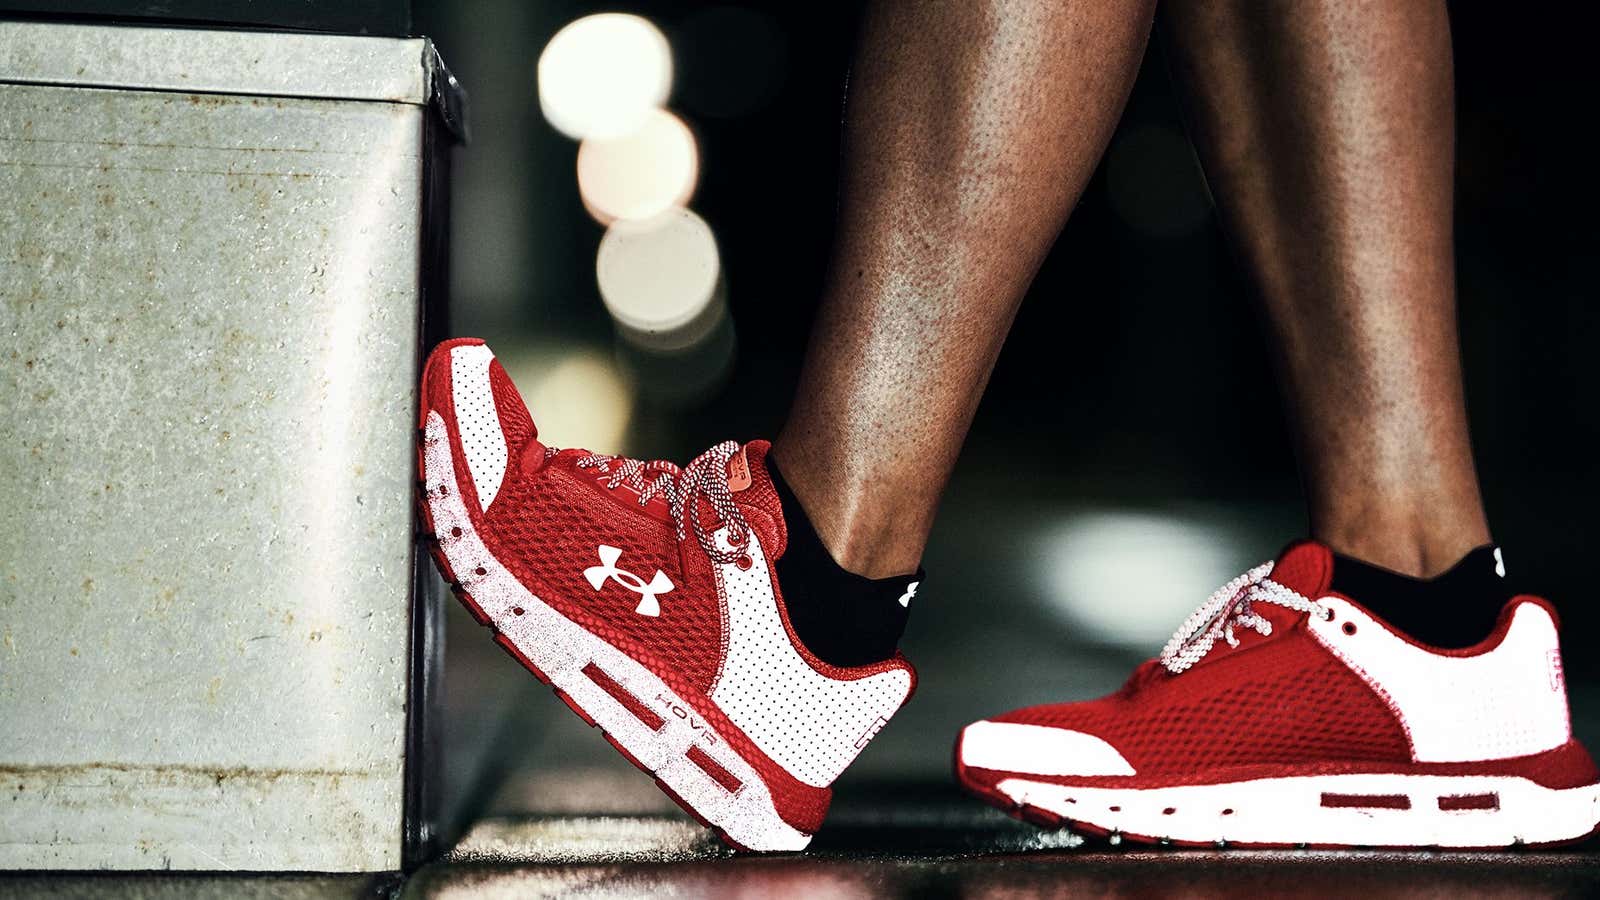 Under Armour is running into some challenges it didn’t see coming.